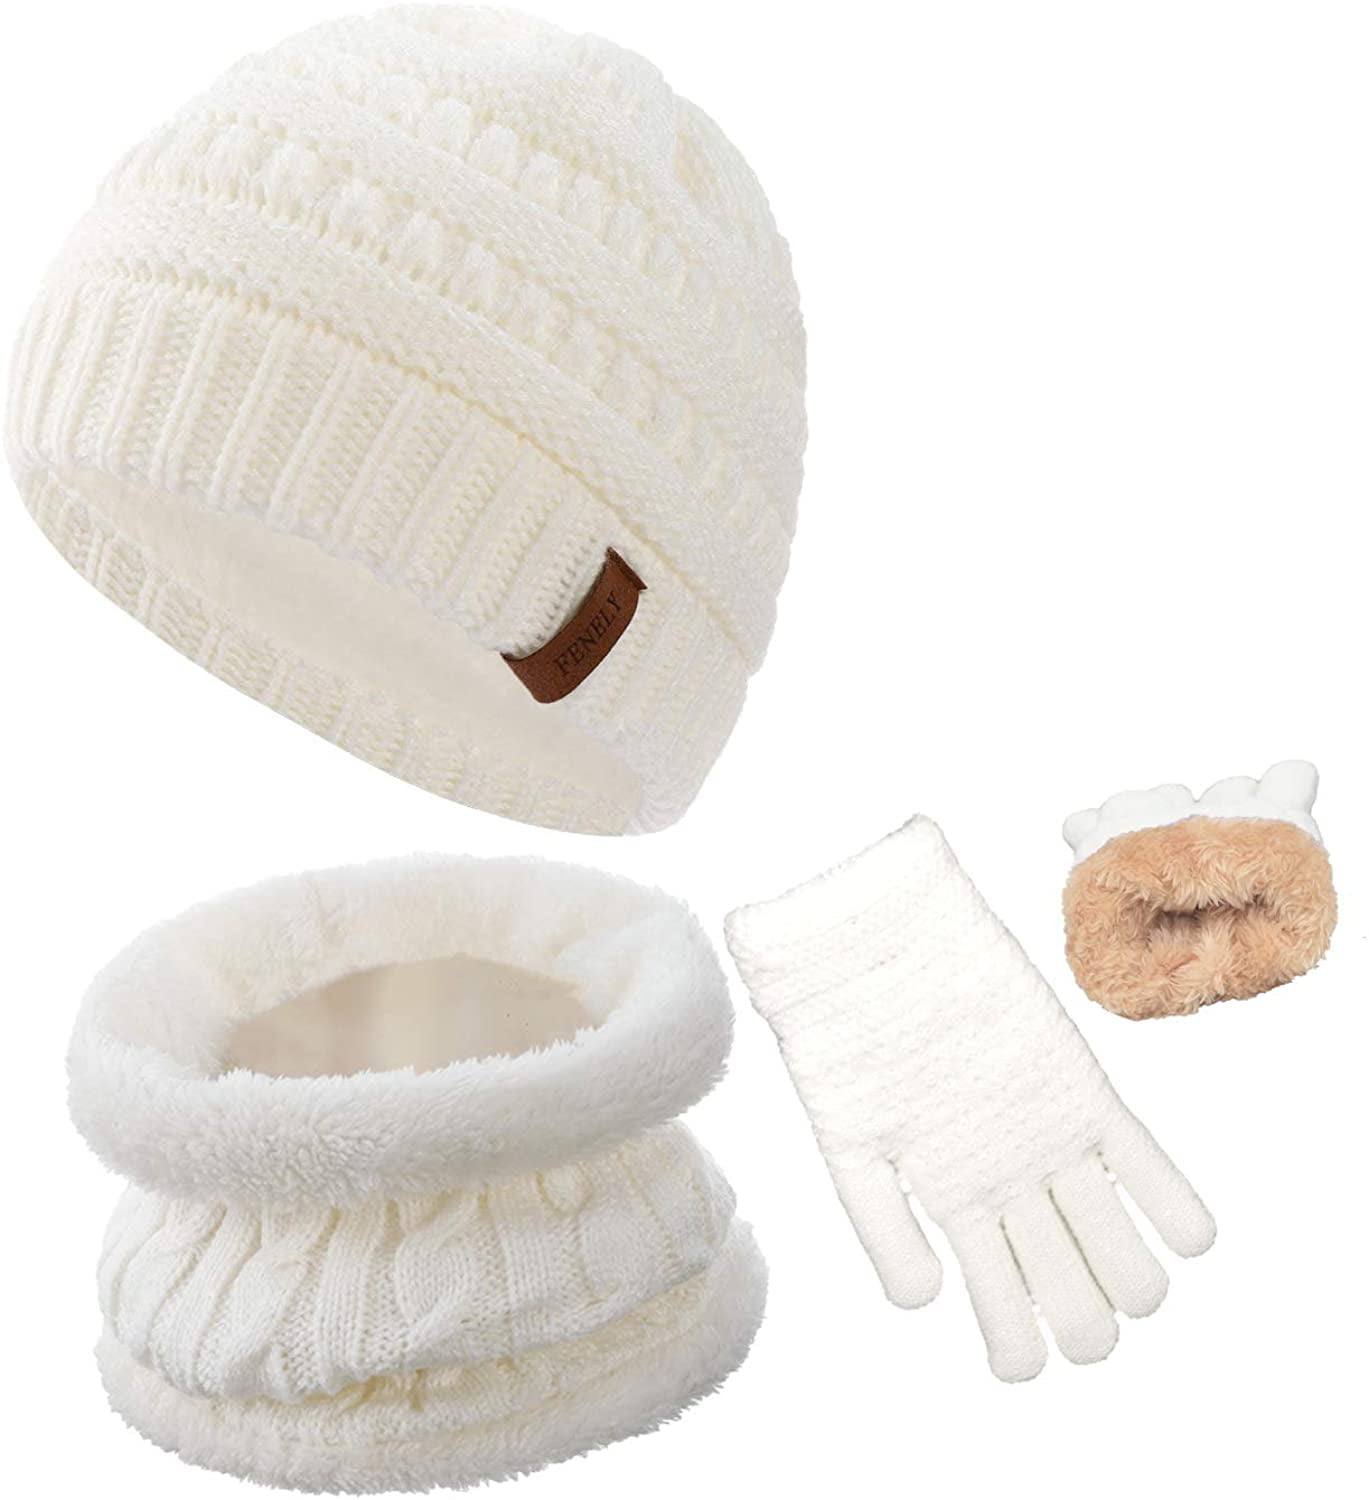 2 Set Baby Mittens Hat Scarf Gloves Kit Winter Fleece Lined Thermal Cap Scarf Warm Mittens for Kids 0-24 Months 